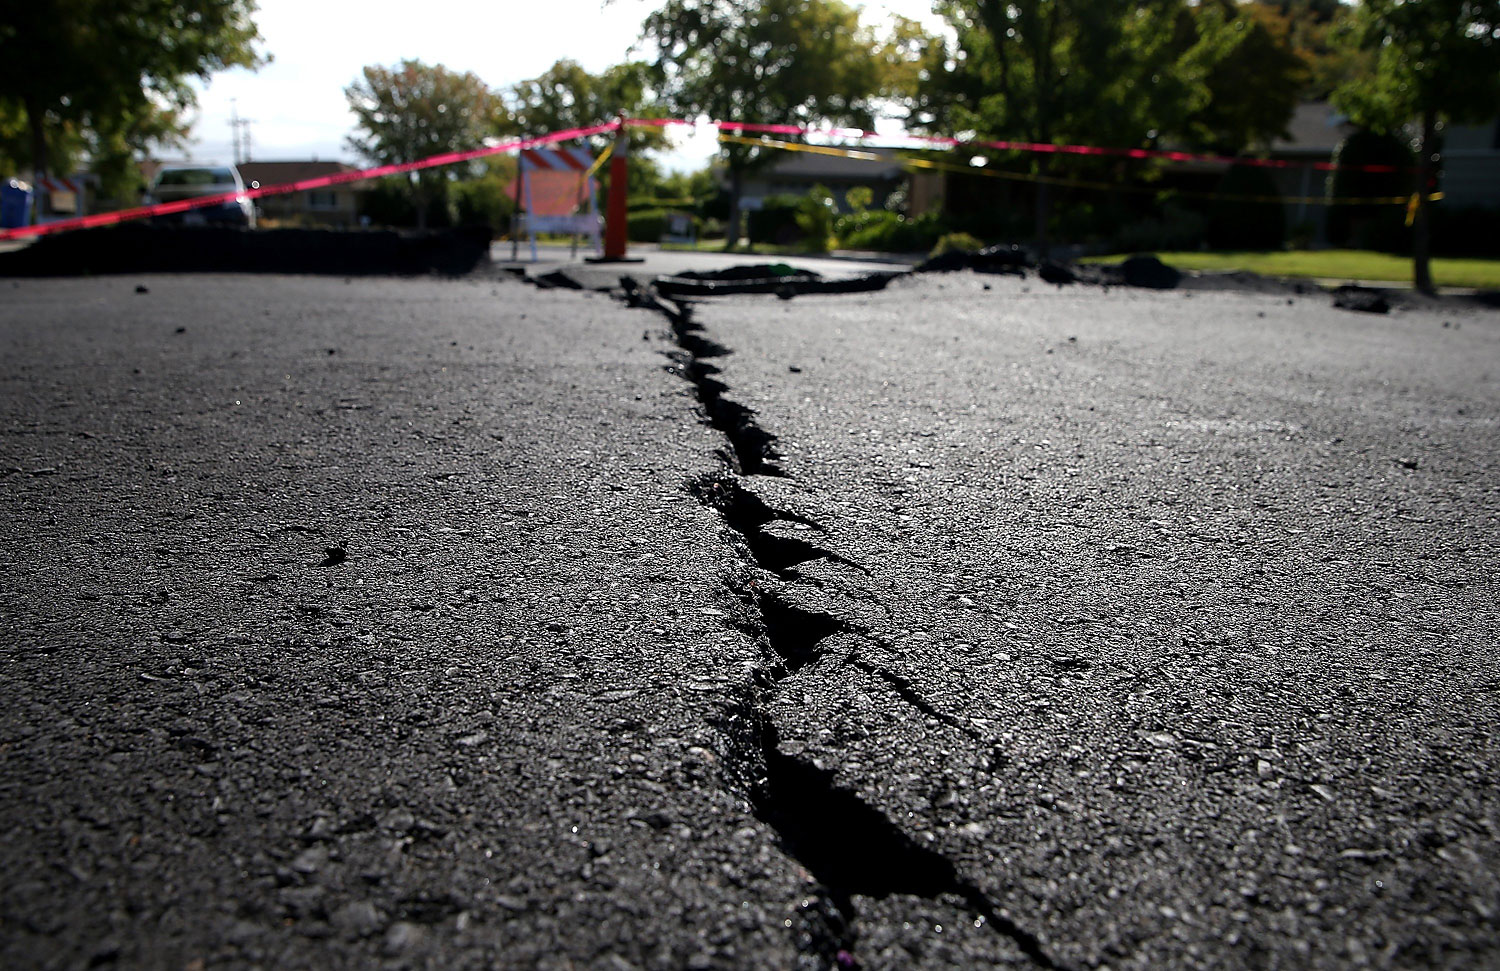 Napa Area Businesses Continue Recovery Effort From Earthquake